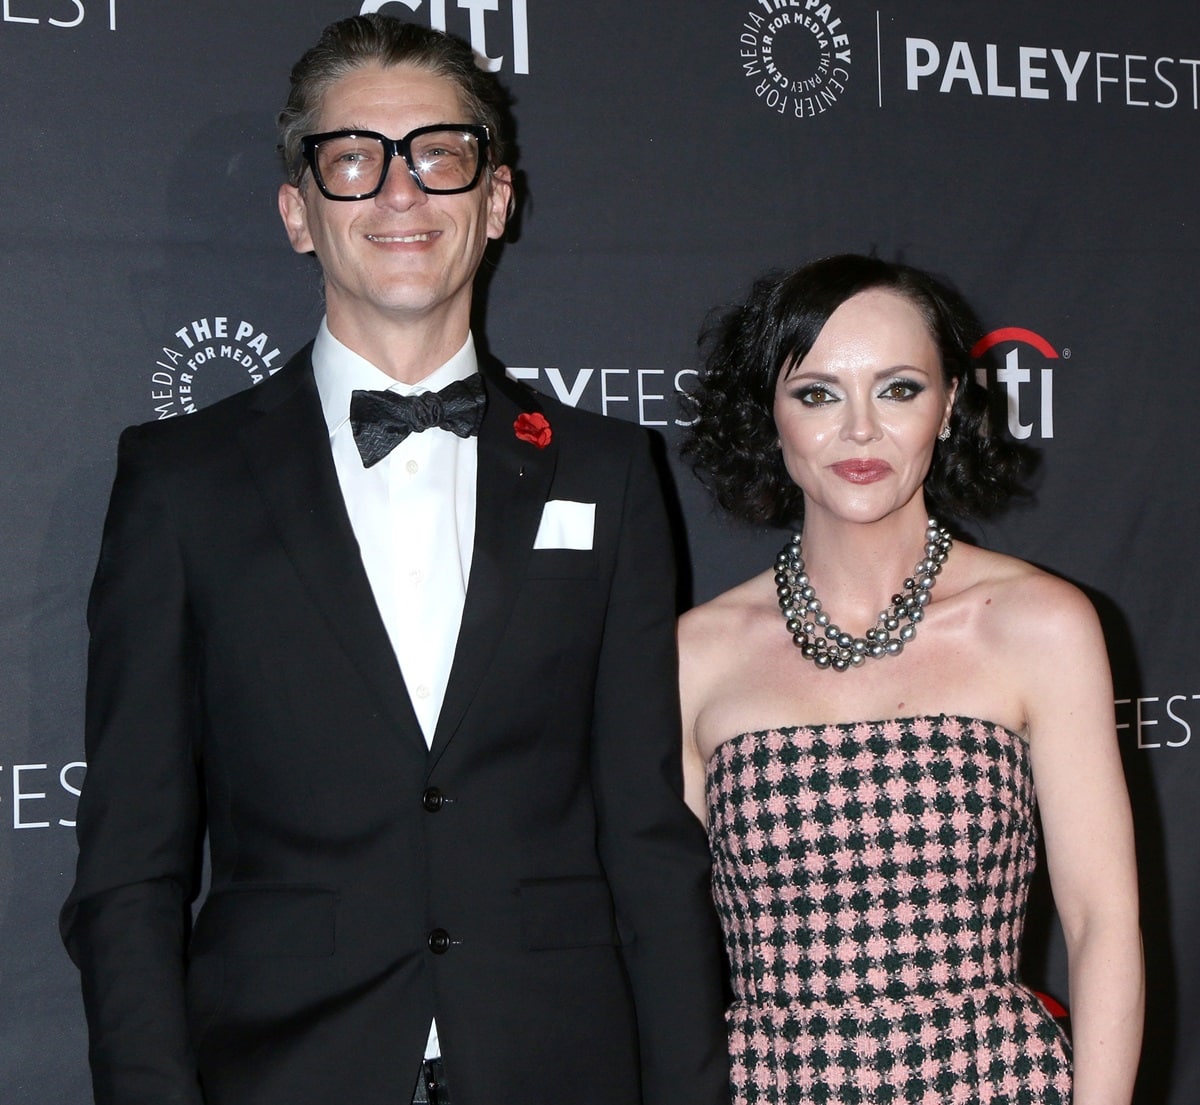 Christina Ricci married Mark Hampton in October 2021 and they met in 2020 after Ricci's divorce from her first husband, James Heerdegen